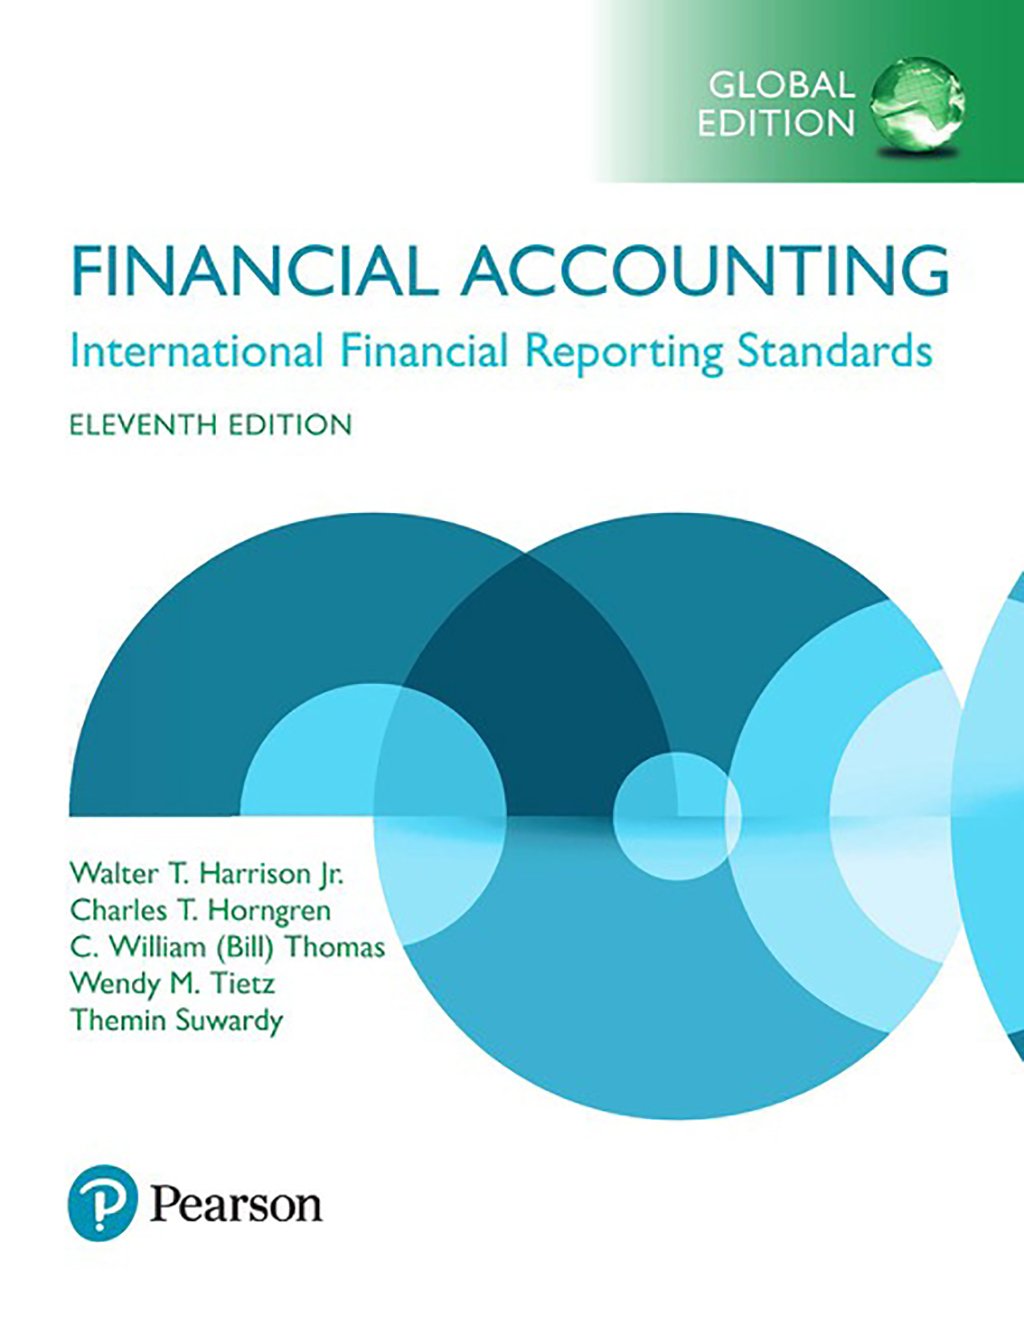 Financial Accounting: International Financial Reporting Standards, Global Edition MyLab Accounting, 11th Edition